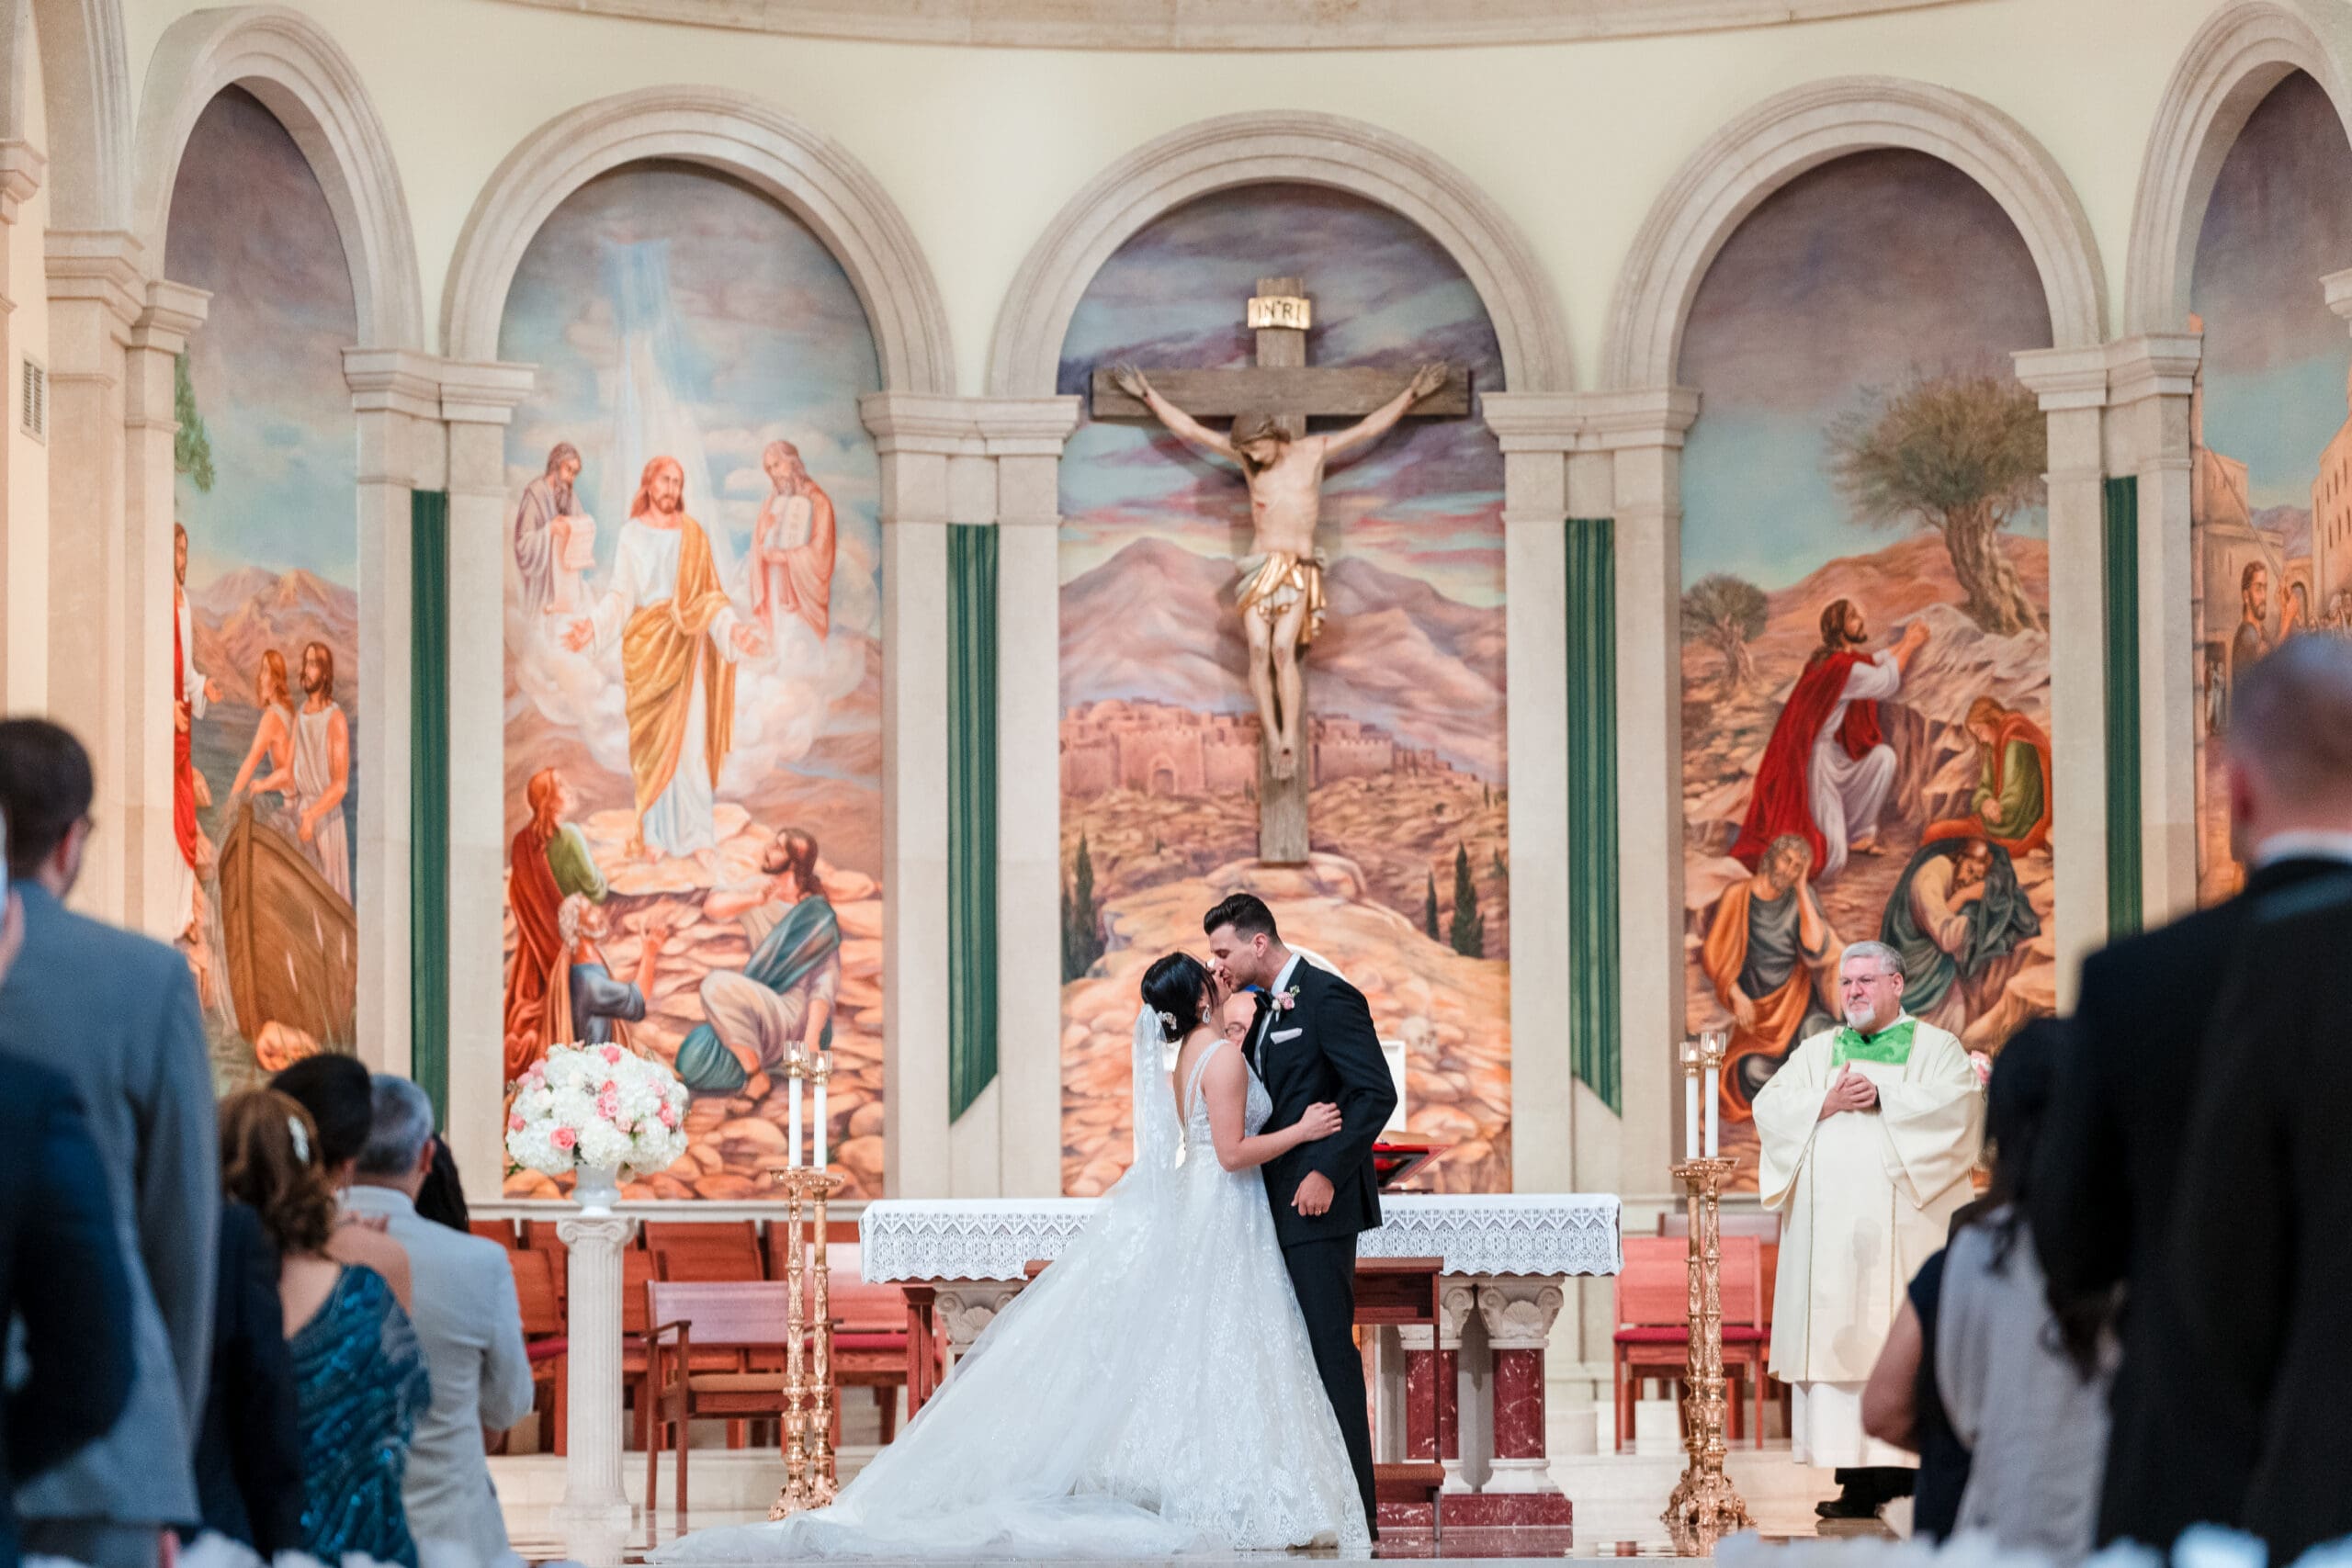 A beautiful chapel scene with a painting in the background, capturing the bride and groom kissing at the altar.